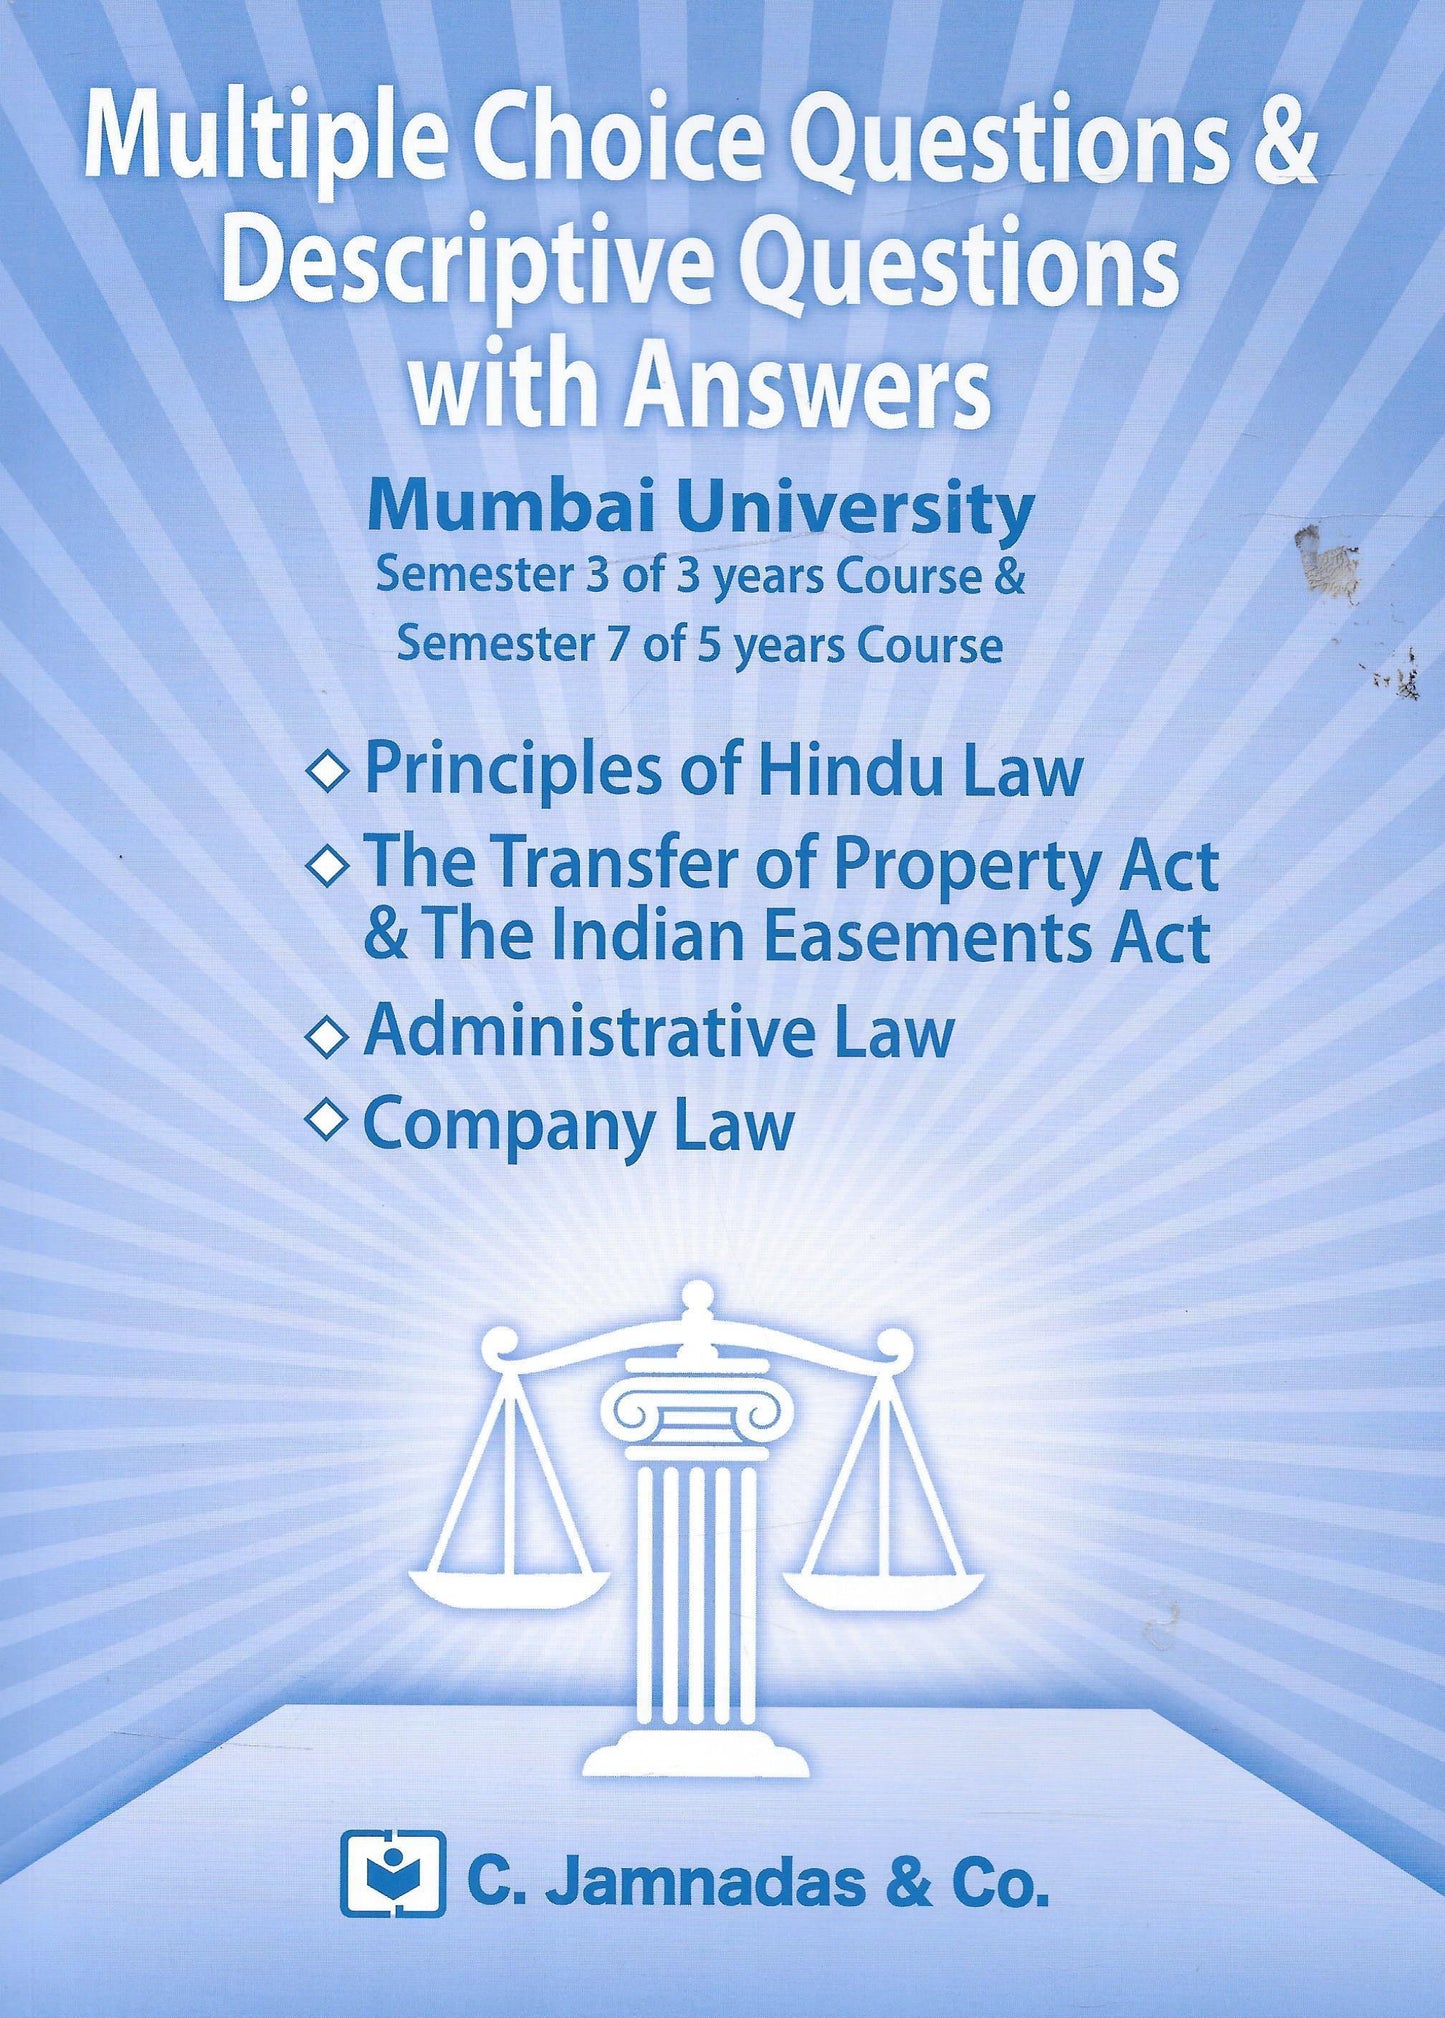 MCQs and Descriptive Questions with Answers for Mumbai University LLB exams semester 3 of 3 years and Semester 7 of 5 years course